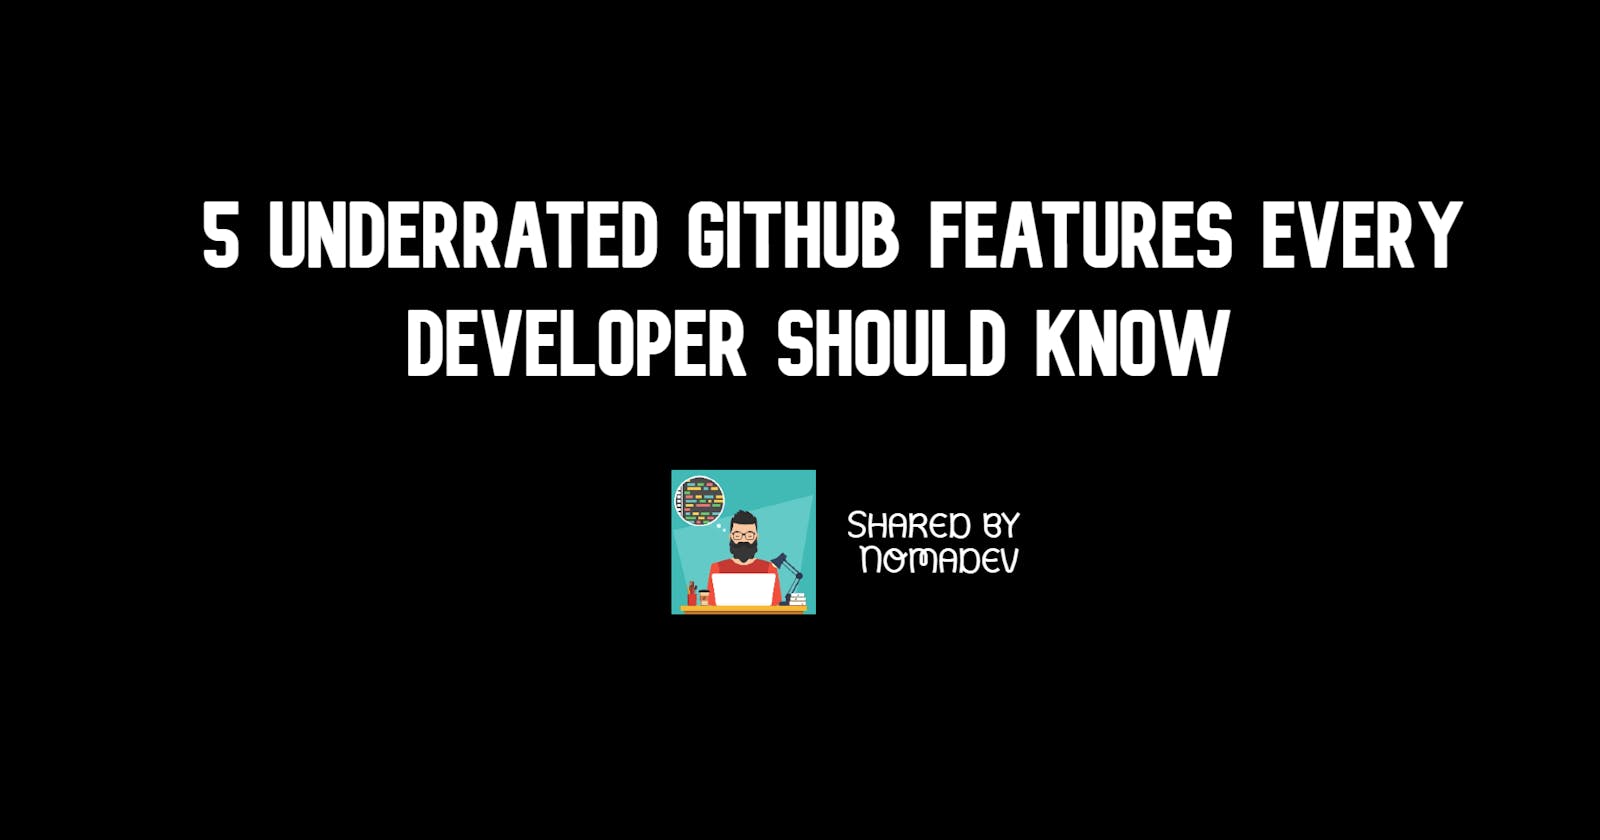 5 Underrated Github Features Every Developer Should Know